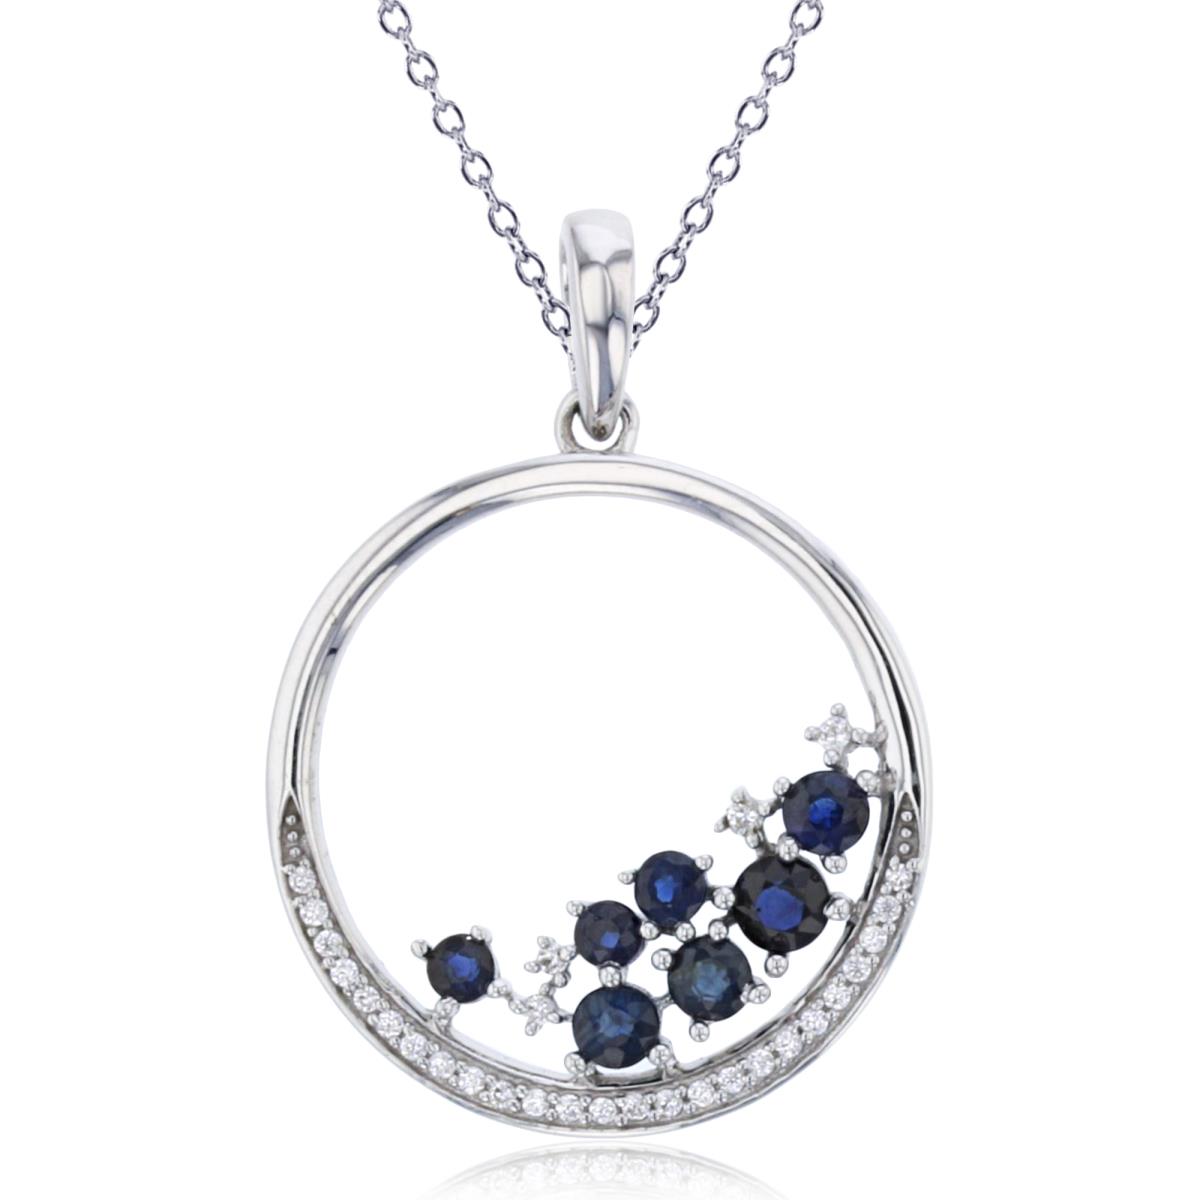 14K White Gold Rnd CZ & Rnd Sapphire Scattered Open Circle 18"Necklace